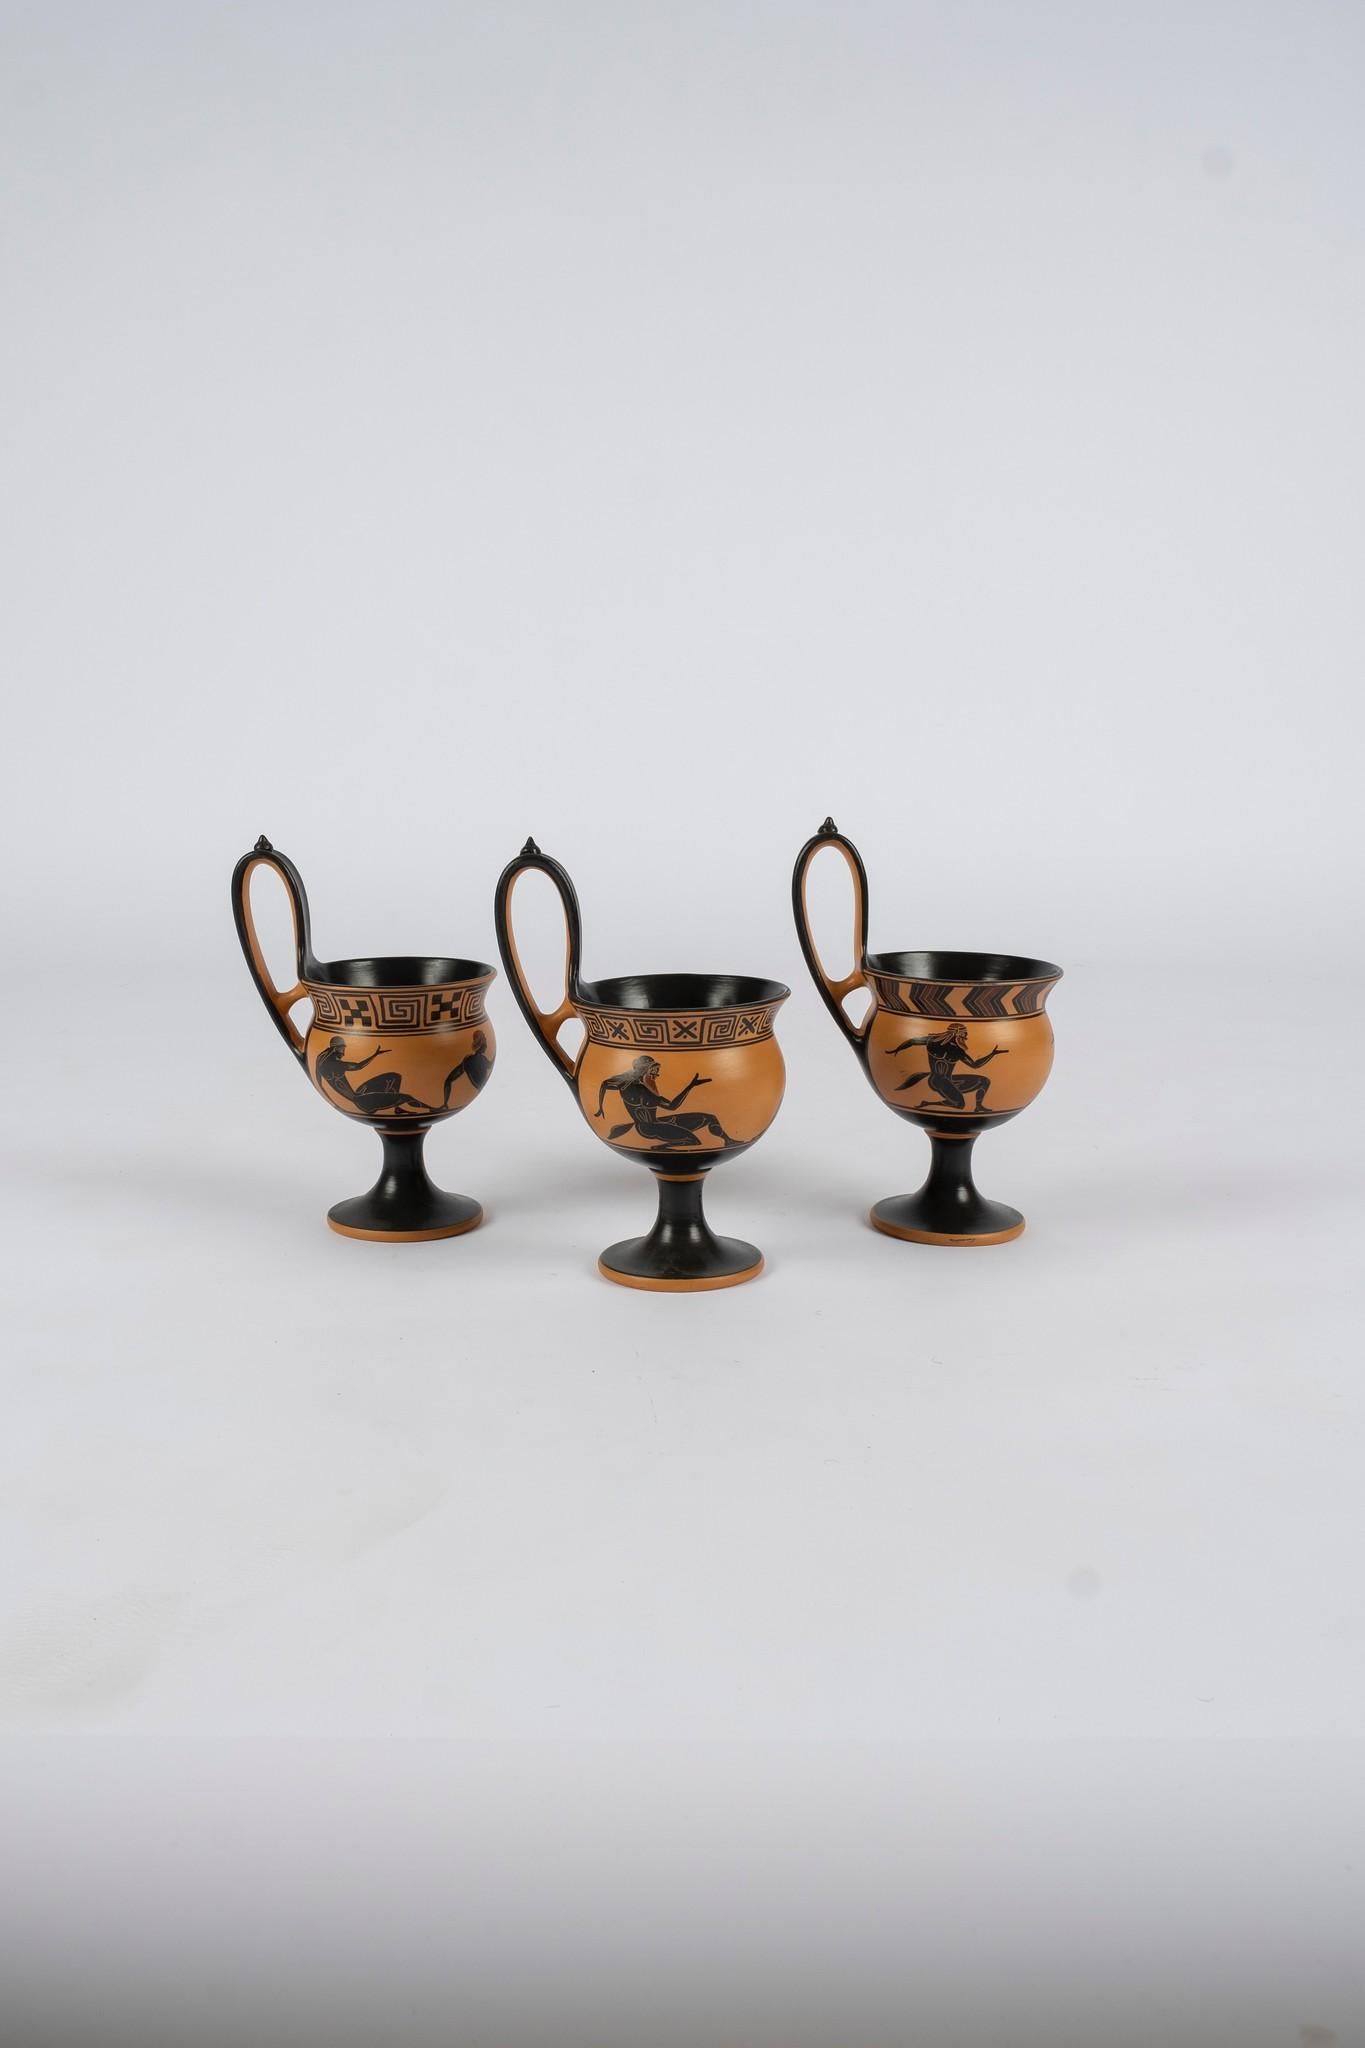 Mid 20th century Atica terra cotta kyathos cup featuring early Classical Greek scenes. This long handle stemmed pottery cup was  used for drinking wine. Sold individually, $995 each.